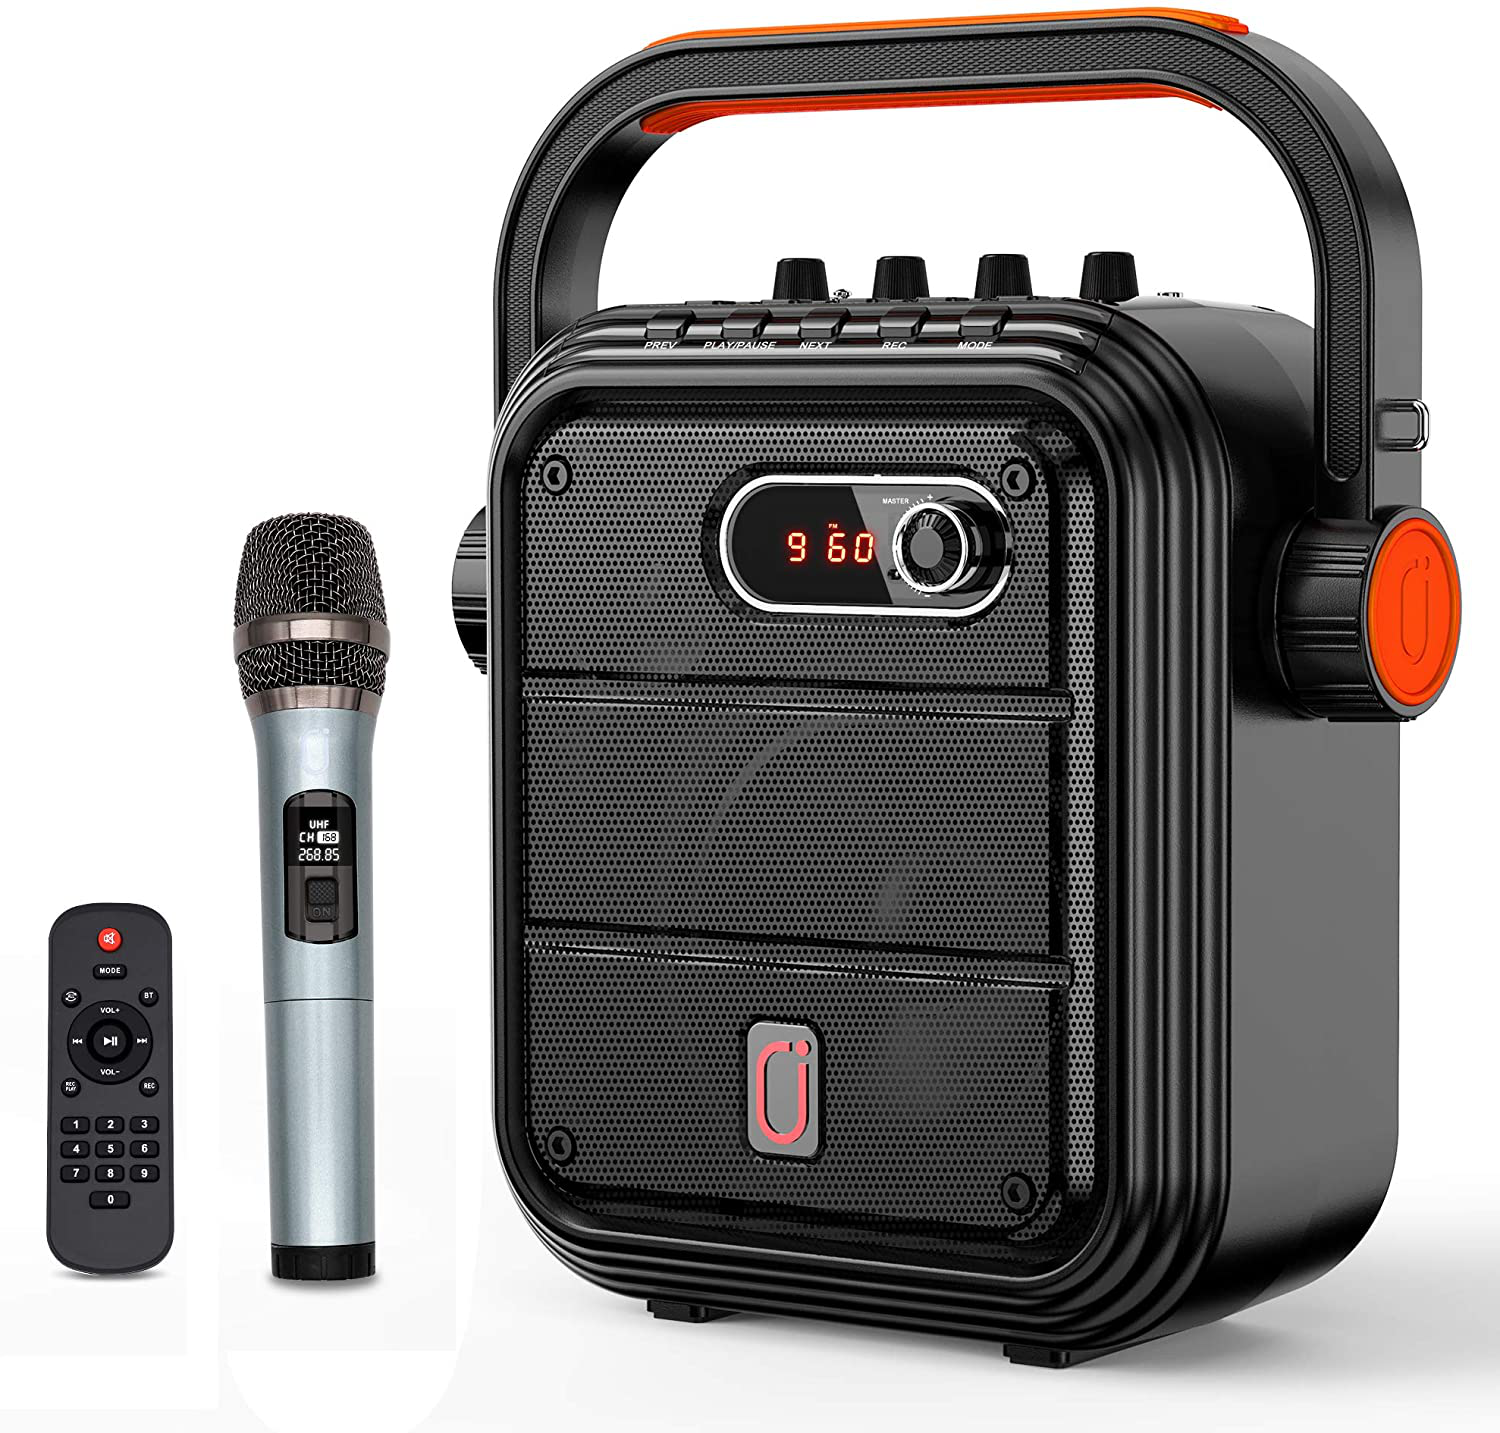 JYX Karaoke Machine Portable Microphone Speaker Set Bluetooth 5.0 Rechargeable PA System with FM Radio, Audio Recording, Remote Control, Supports TF Card/Usb